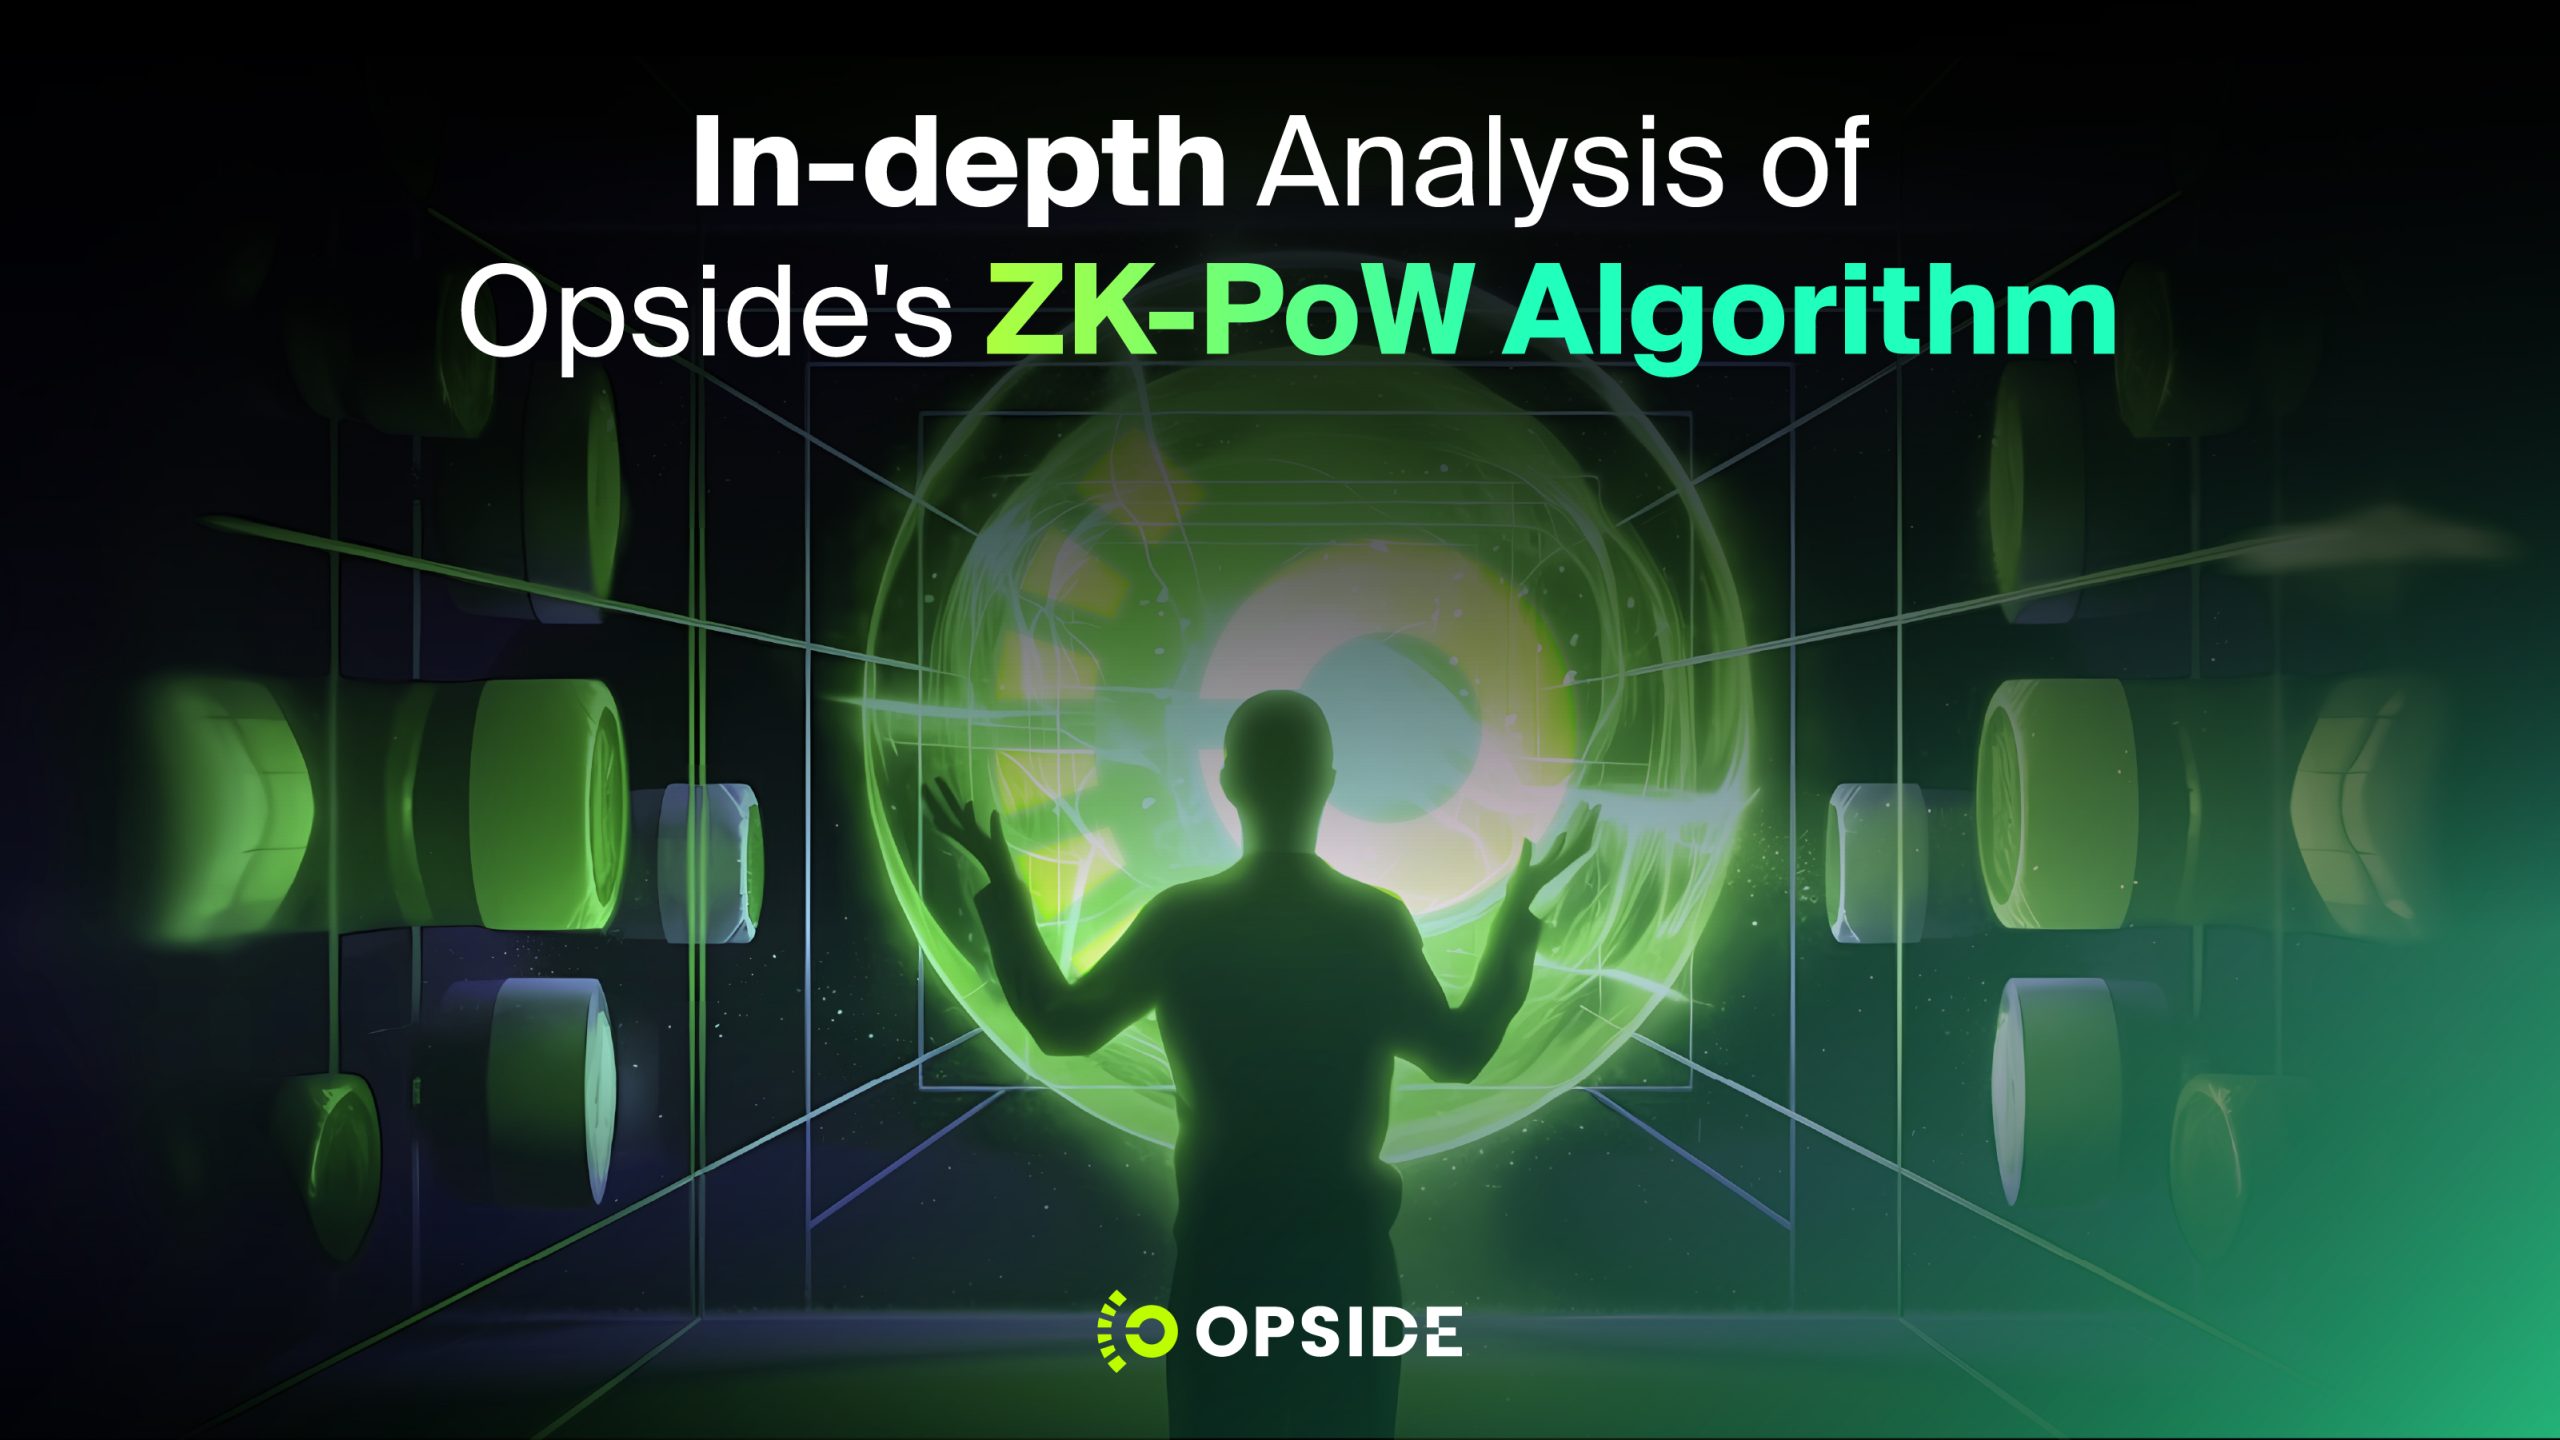 In-depth analysis of the Opsides ZK-PoW algorithm